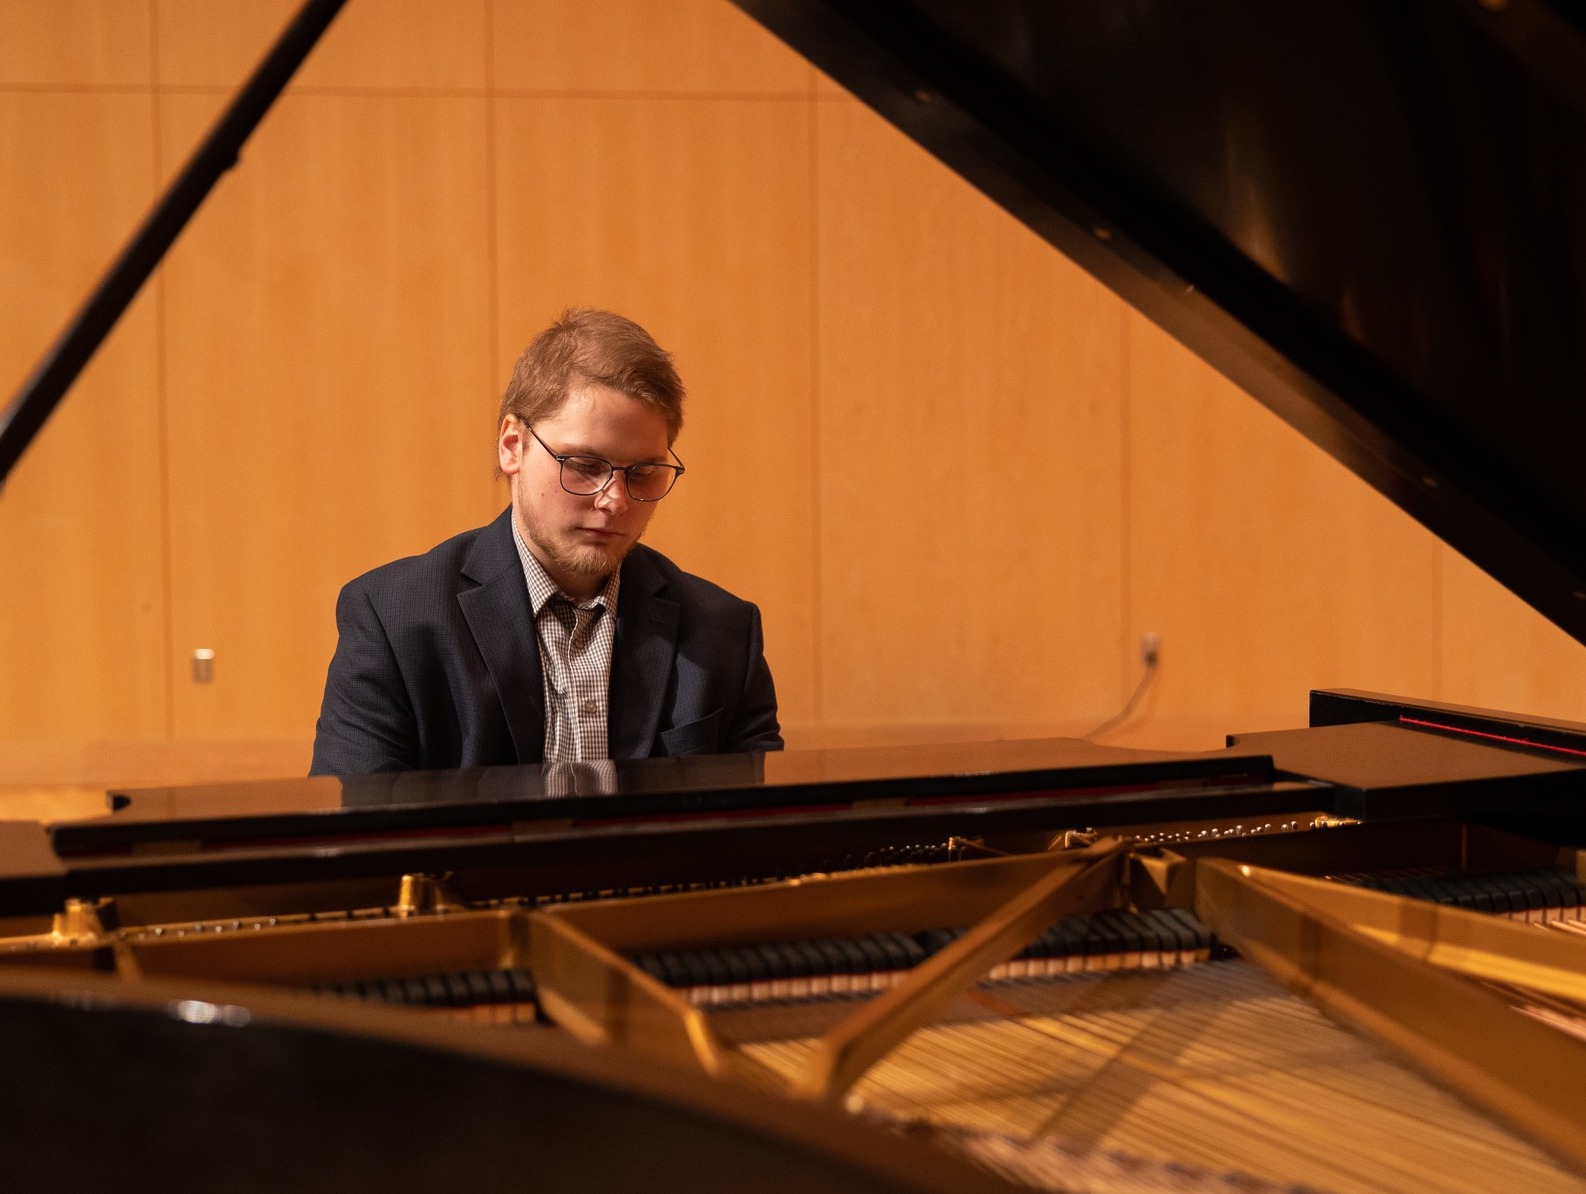 Third-place finisher Nettell on piano